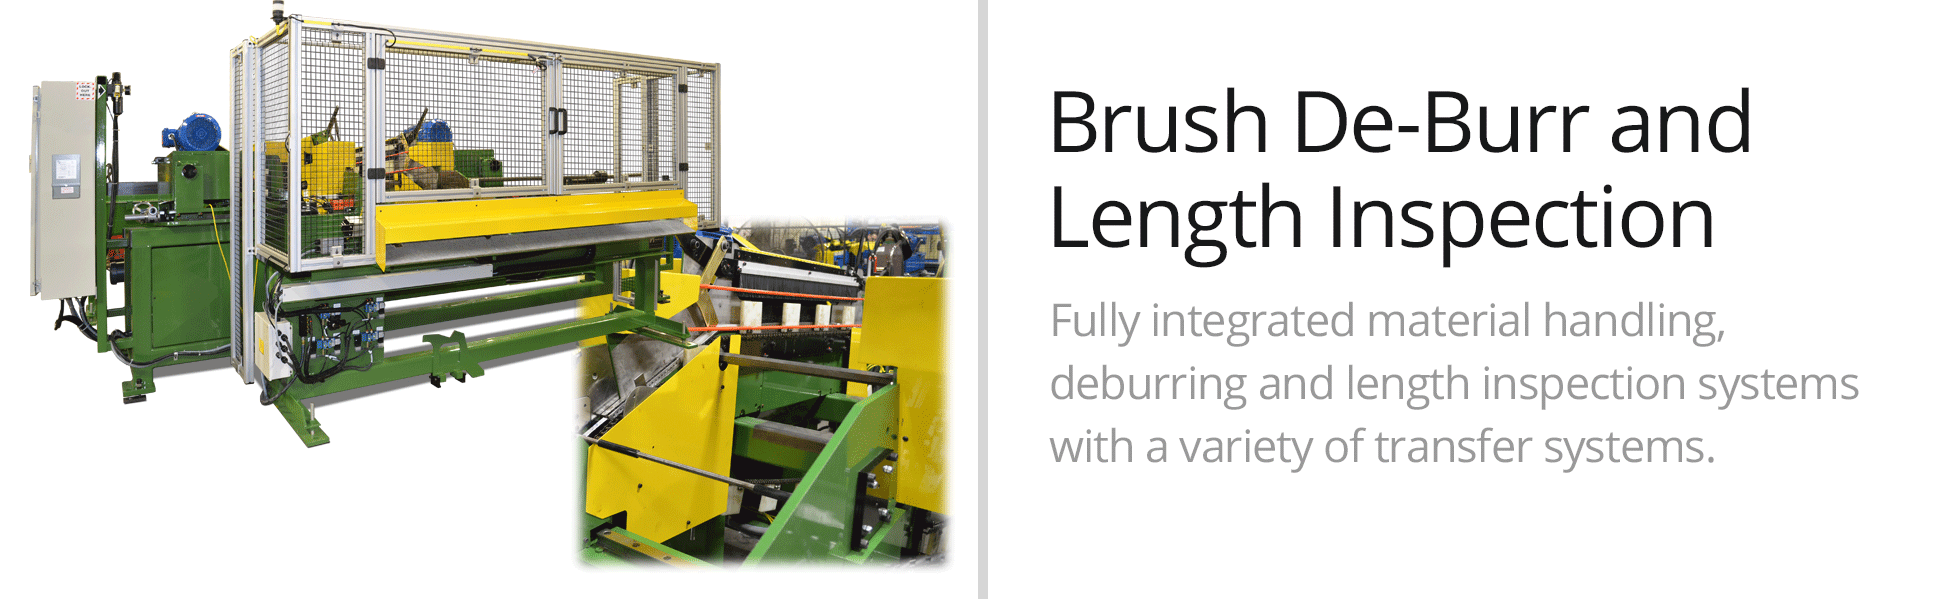 Integrated Brush De-Burr and Length Inspection